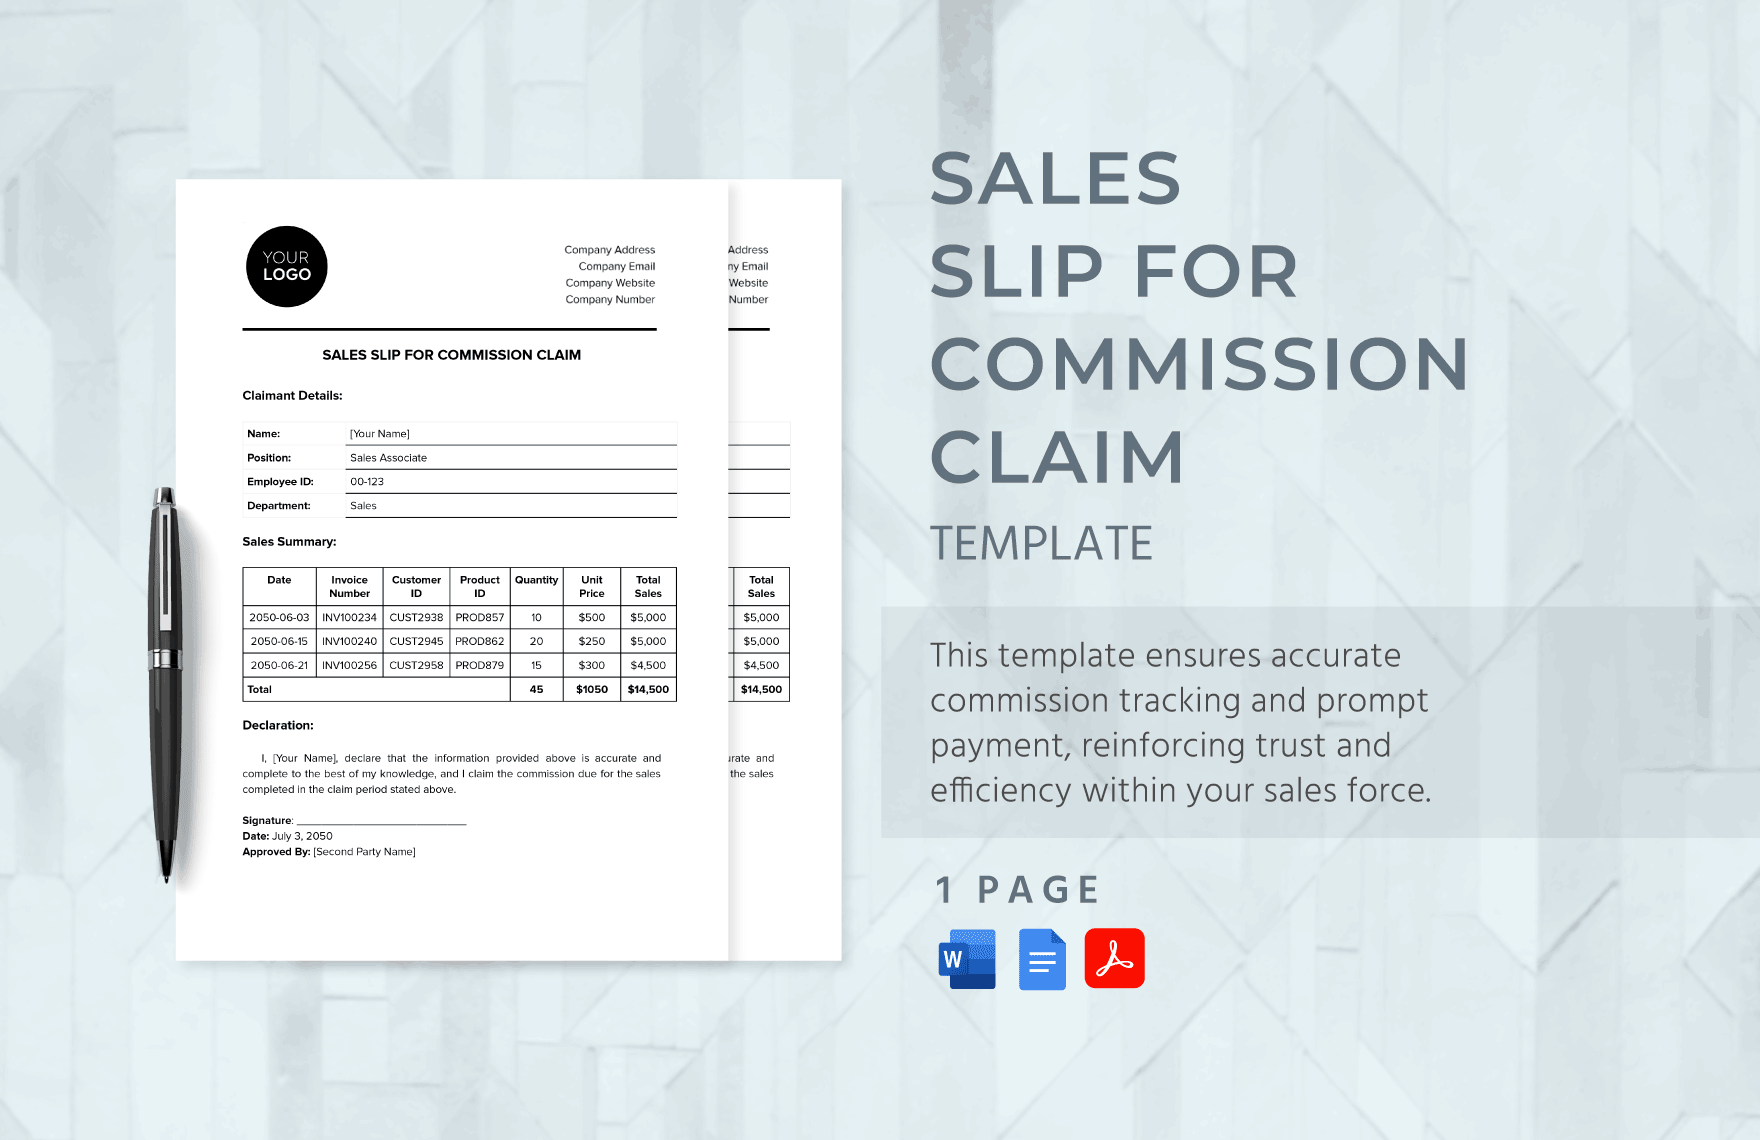 Sales Slip for Commission Claim Template